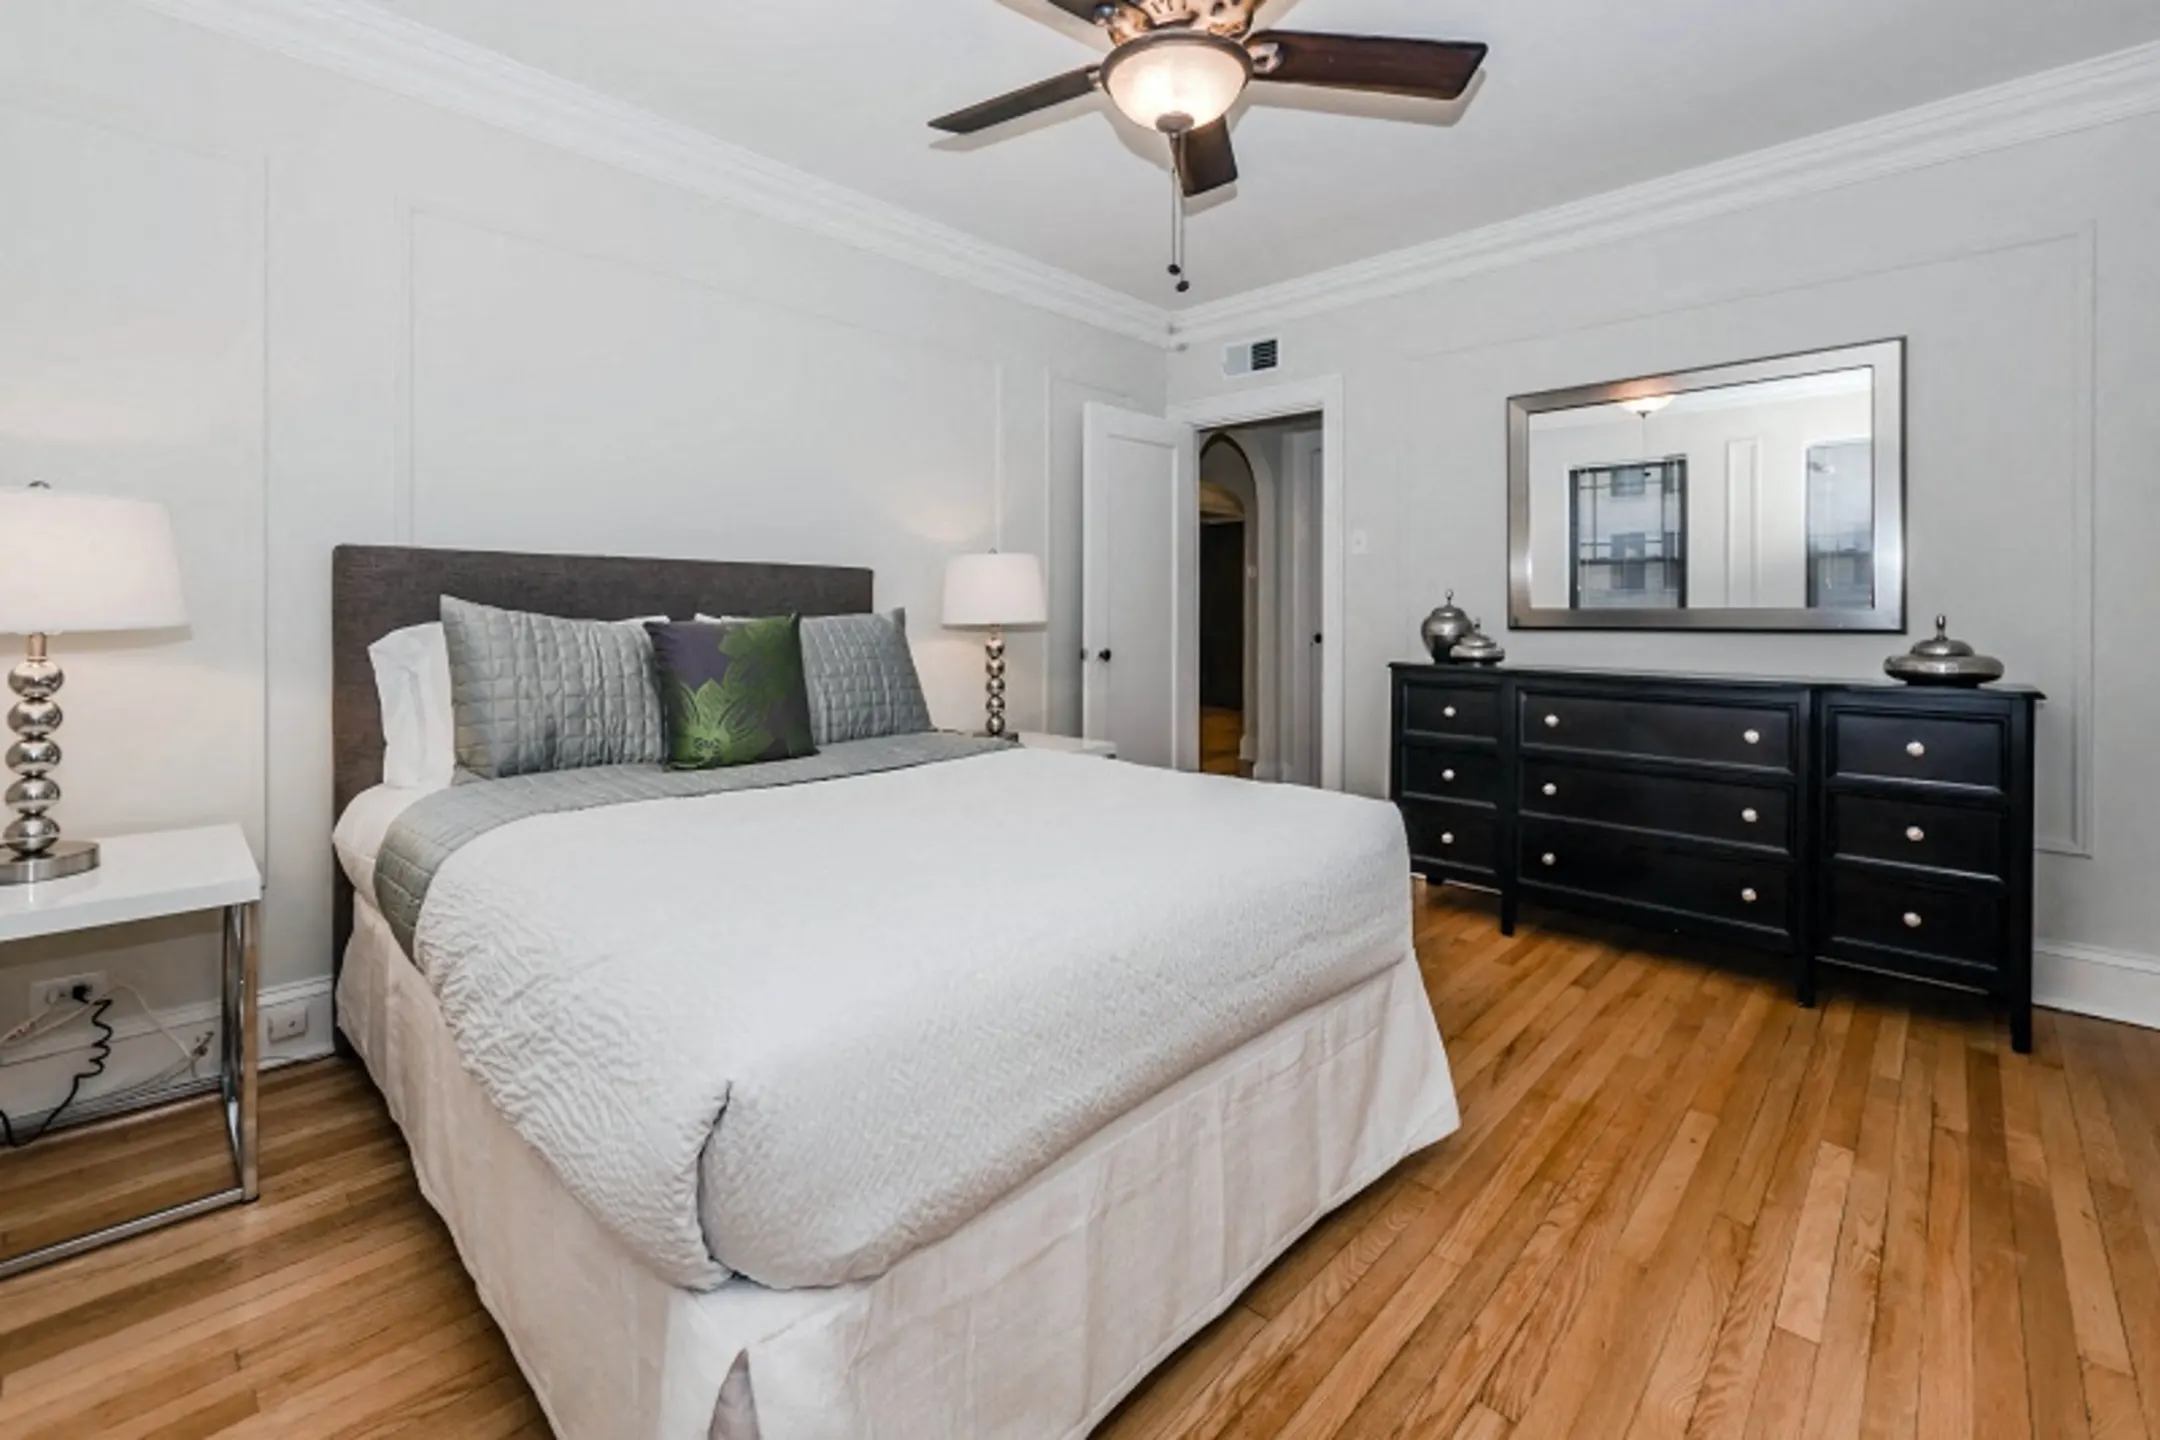 Bedroom - The Chatelaine - Chicago, IL